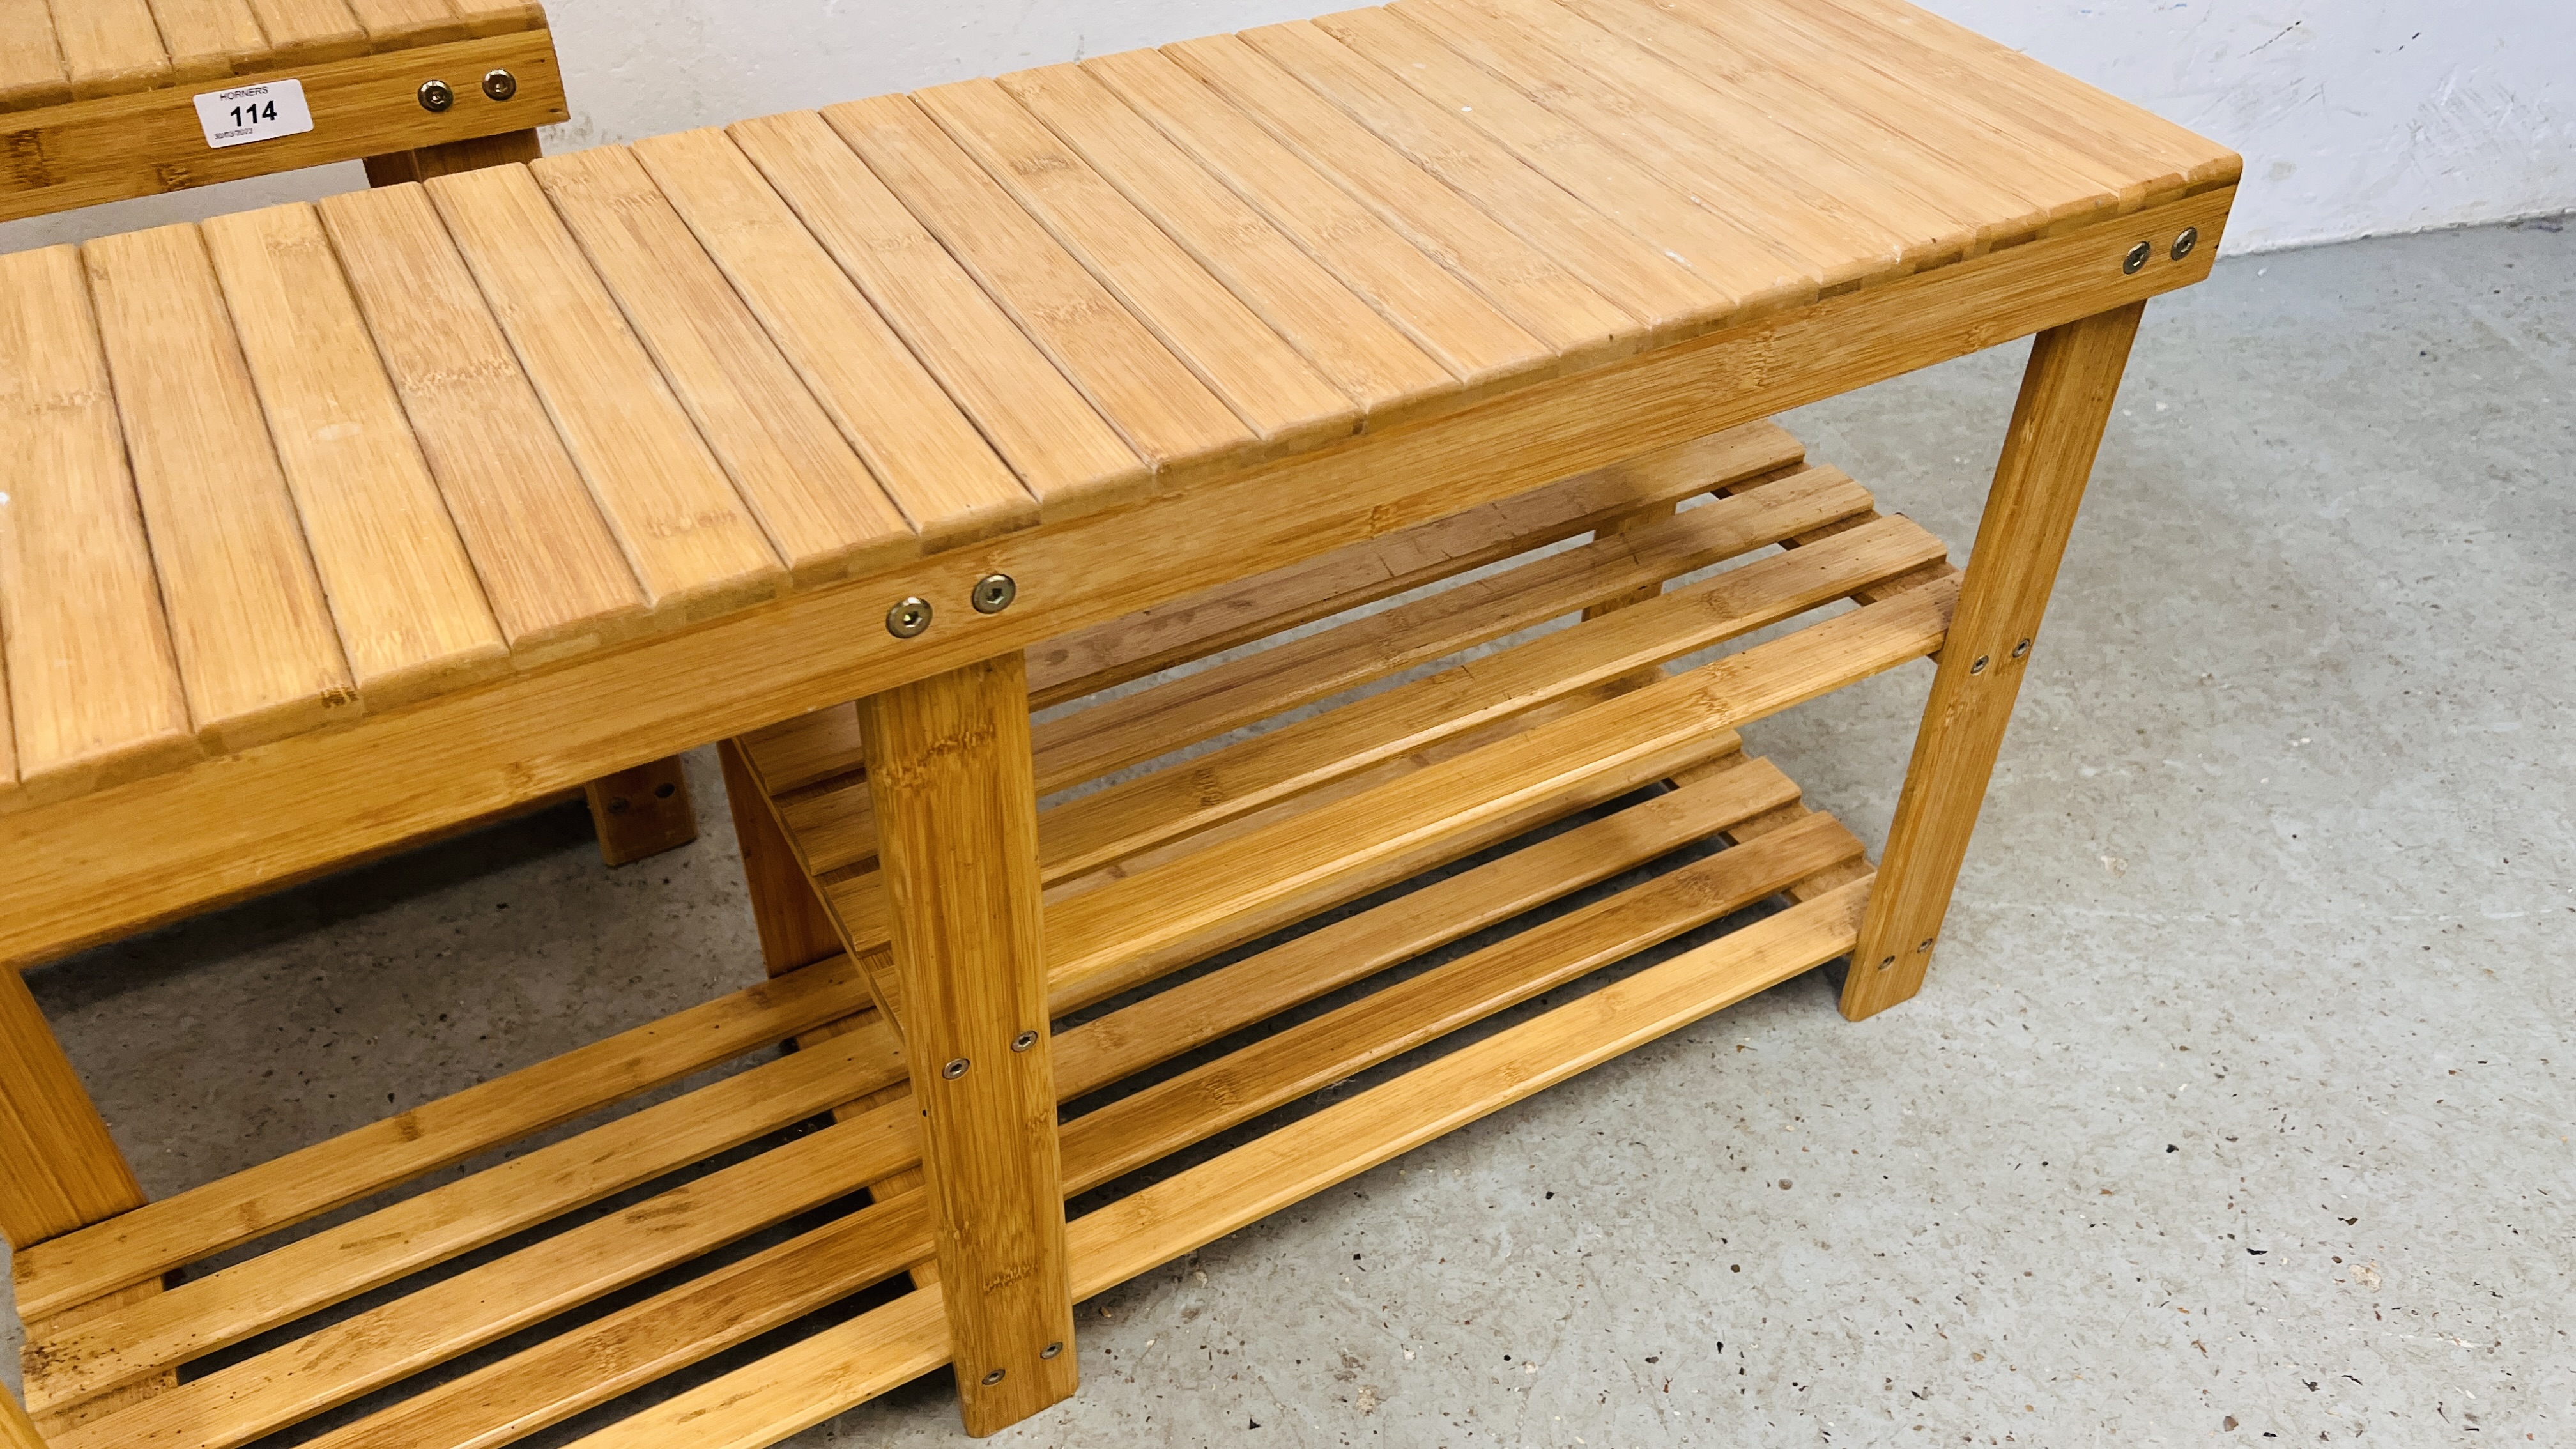 A PAIR OF BAMBOO WOOD BENCHES WITH STORAGE BELOW - LENGTH 88CM. - Image 4 of 5